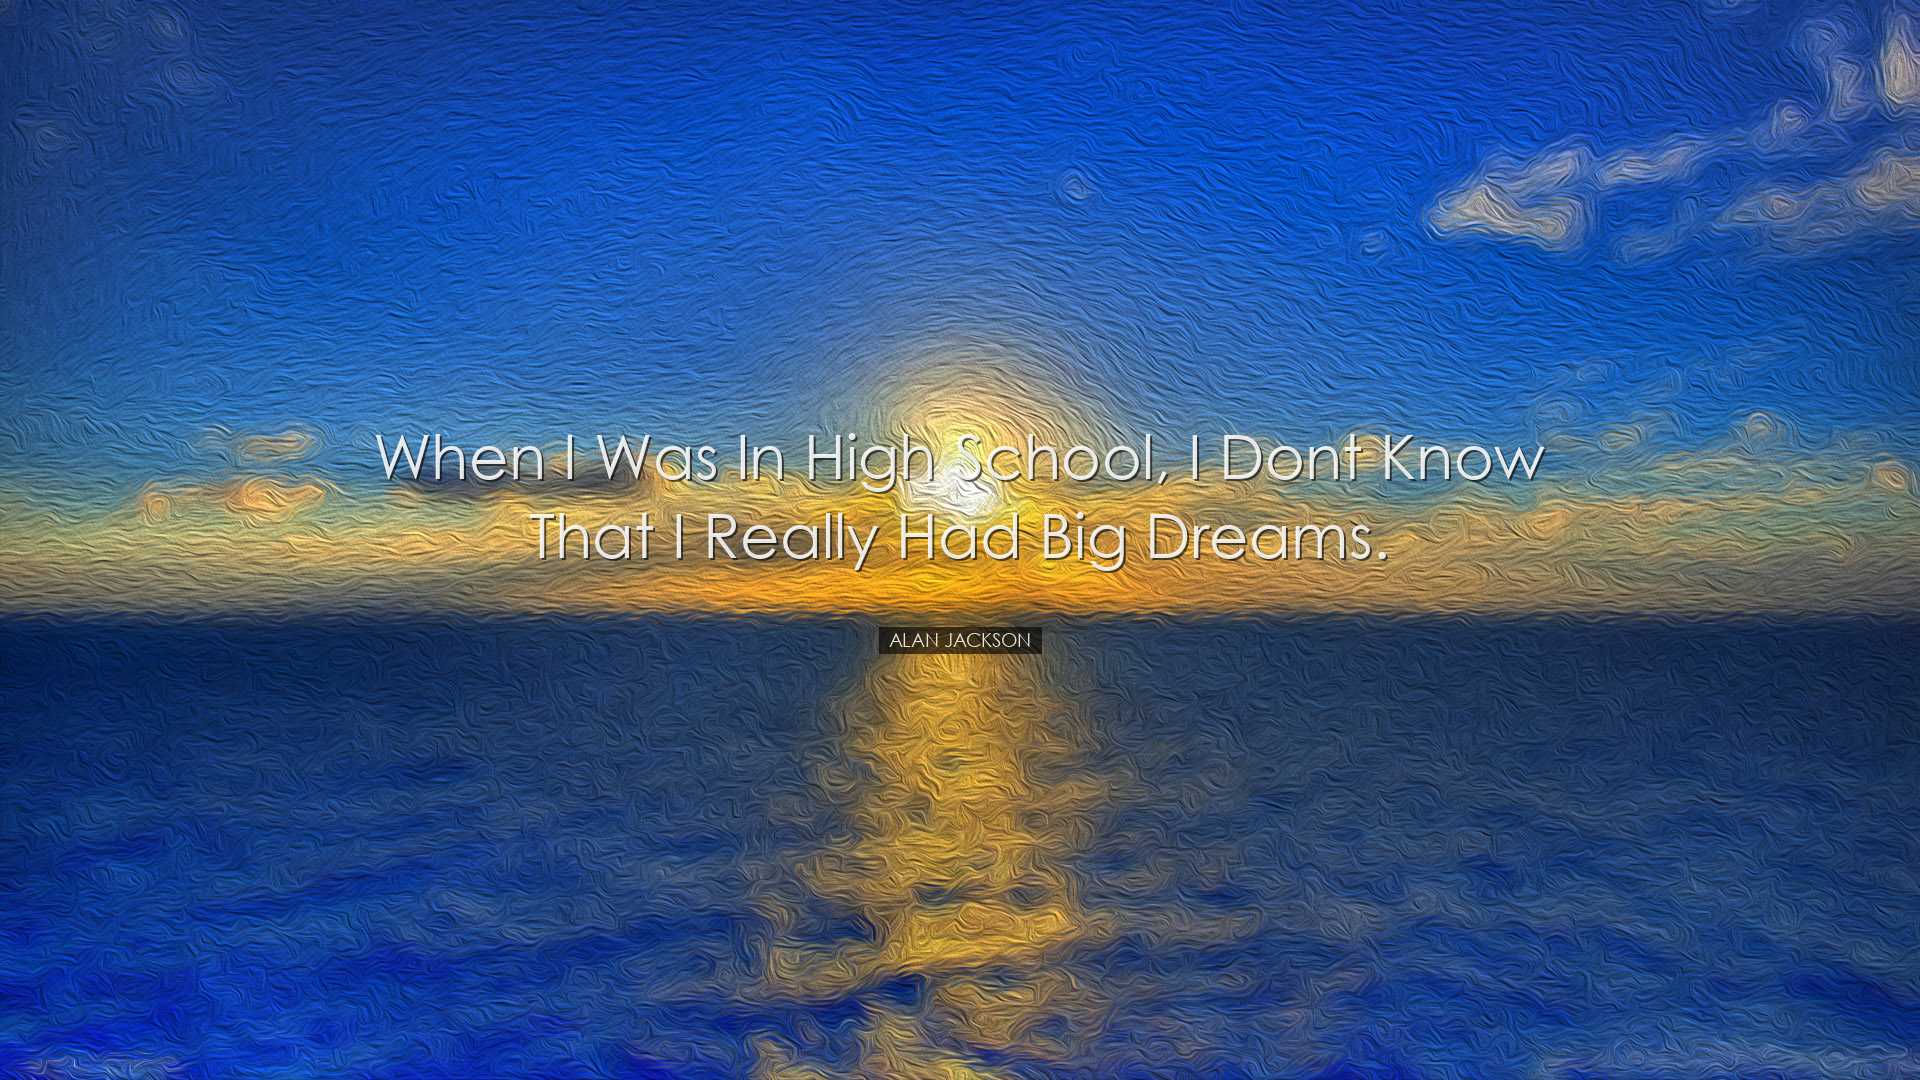 When I was in high school, I dont know that I really had big dream